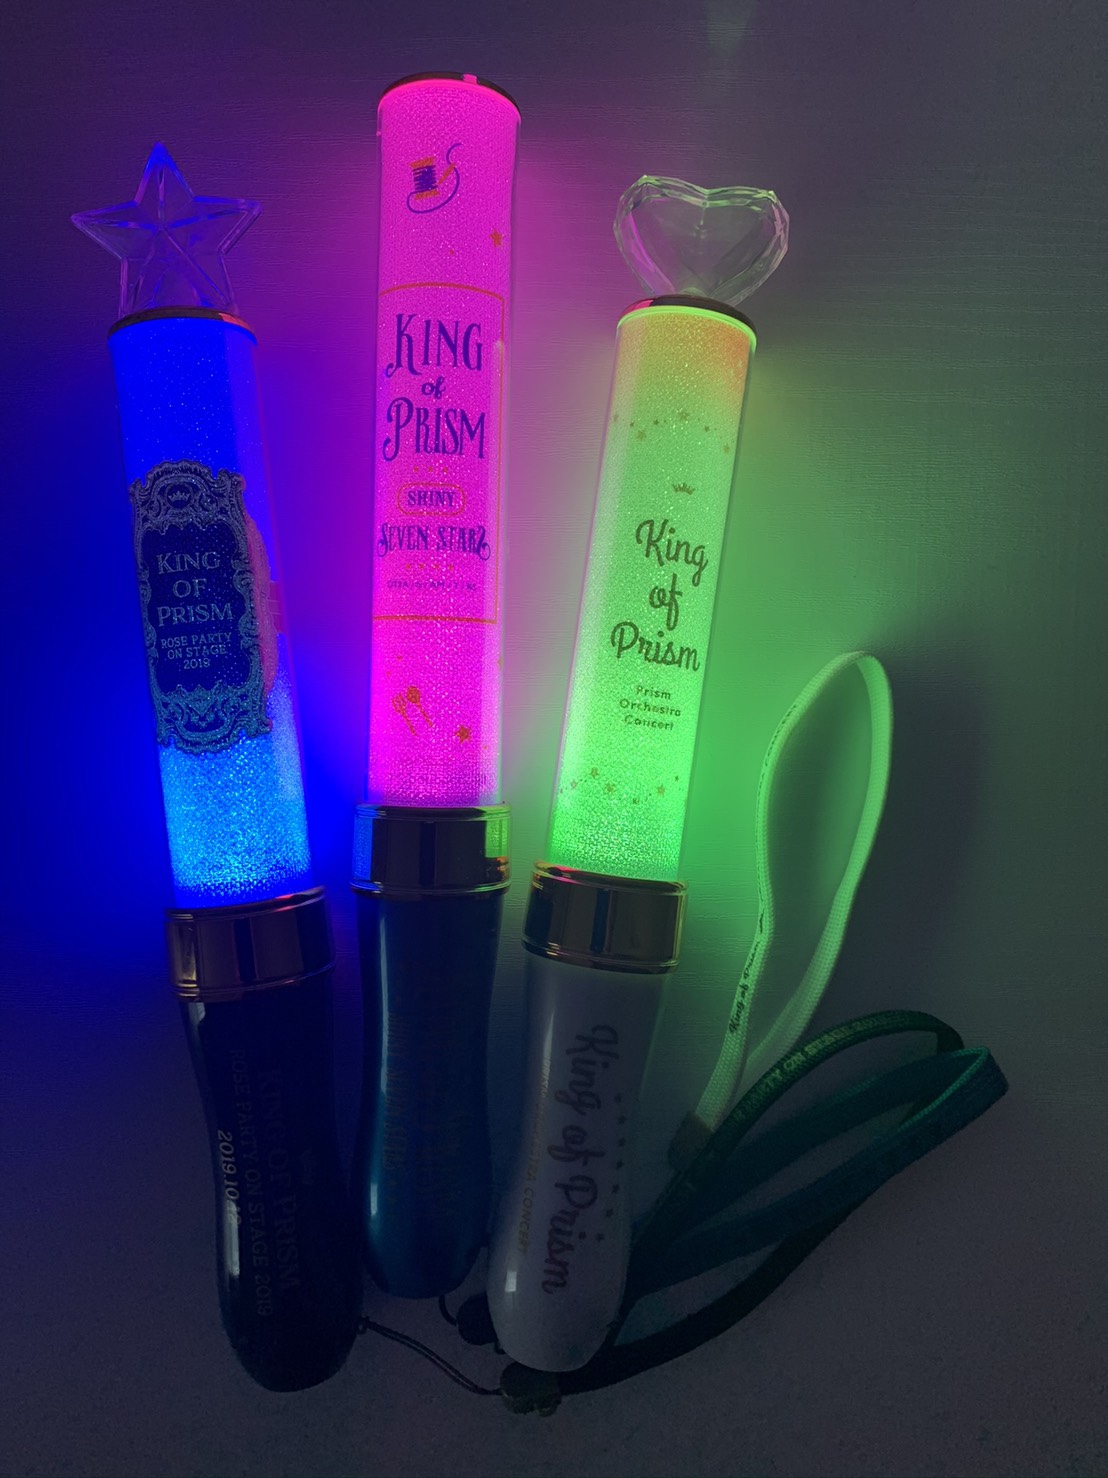 Three glowsticks, one blue, one pink, and one green, each with a King of Prism logo.